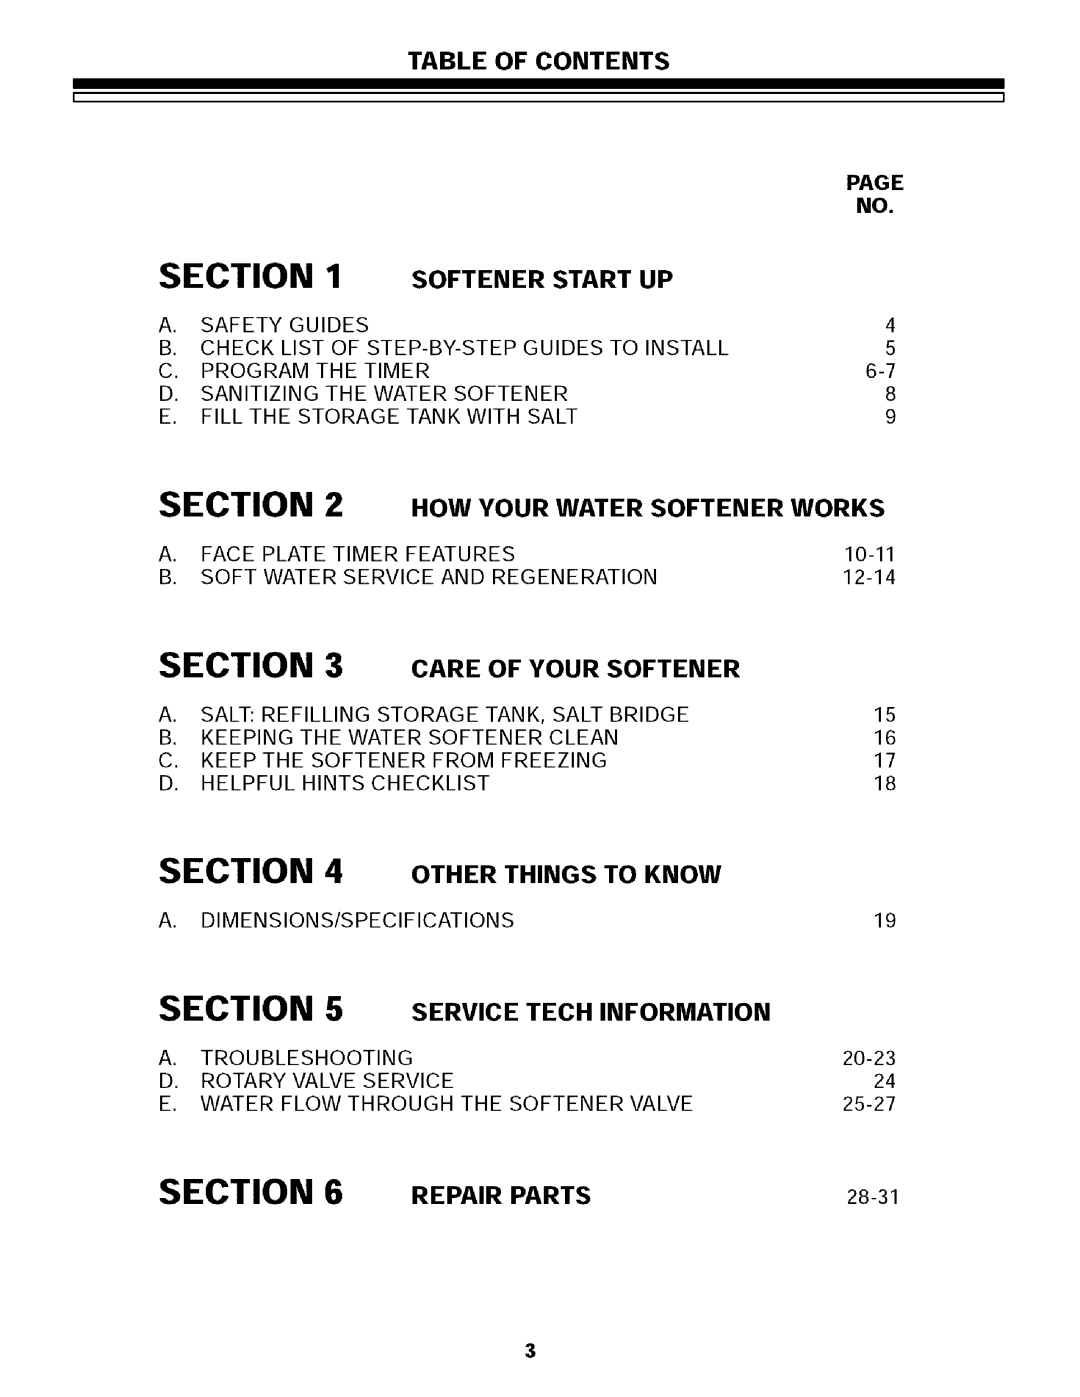 Sears 625.34855 Table of Contents, Softener Start UP, HOW Your Water Softener Works, Care Your Softener, Repair Parts 